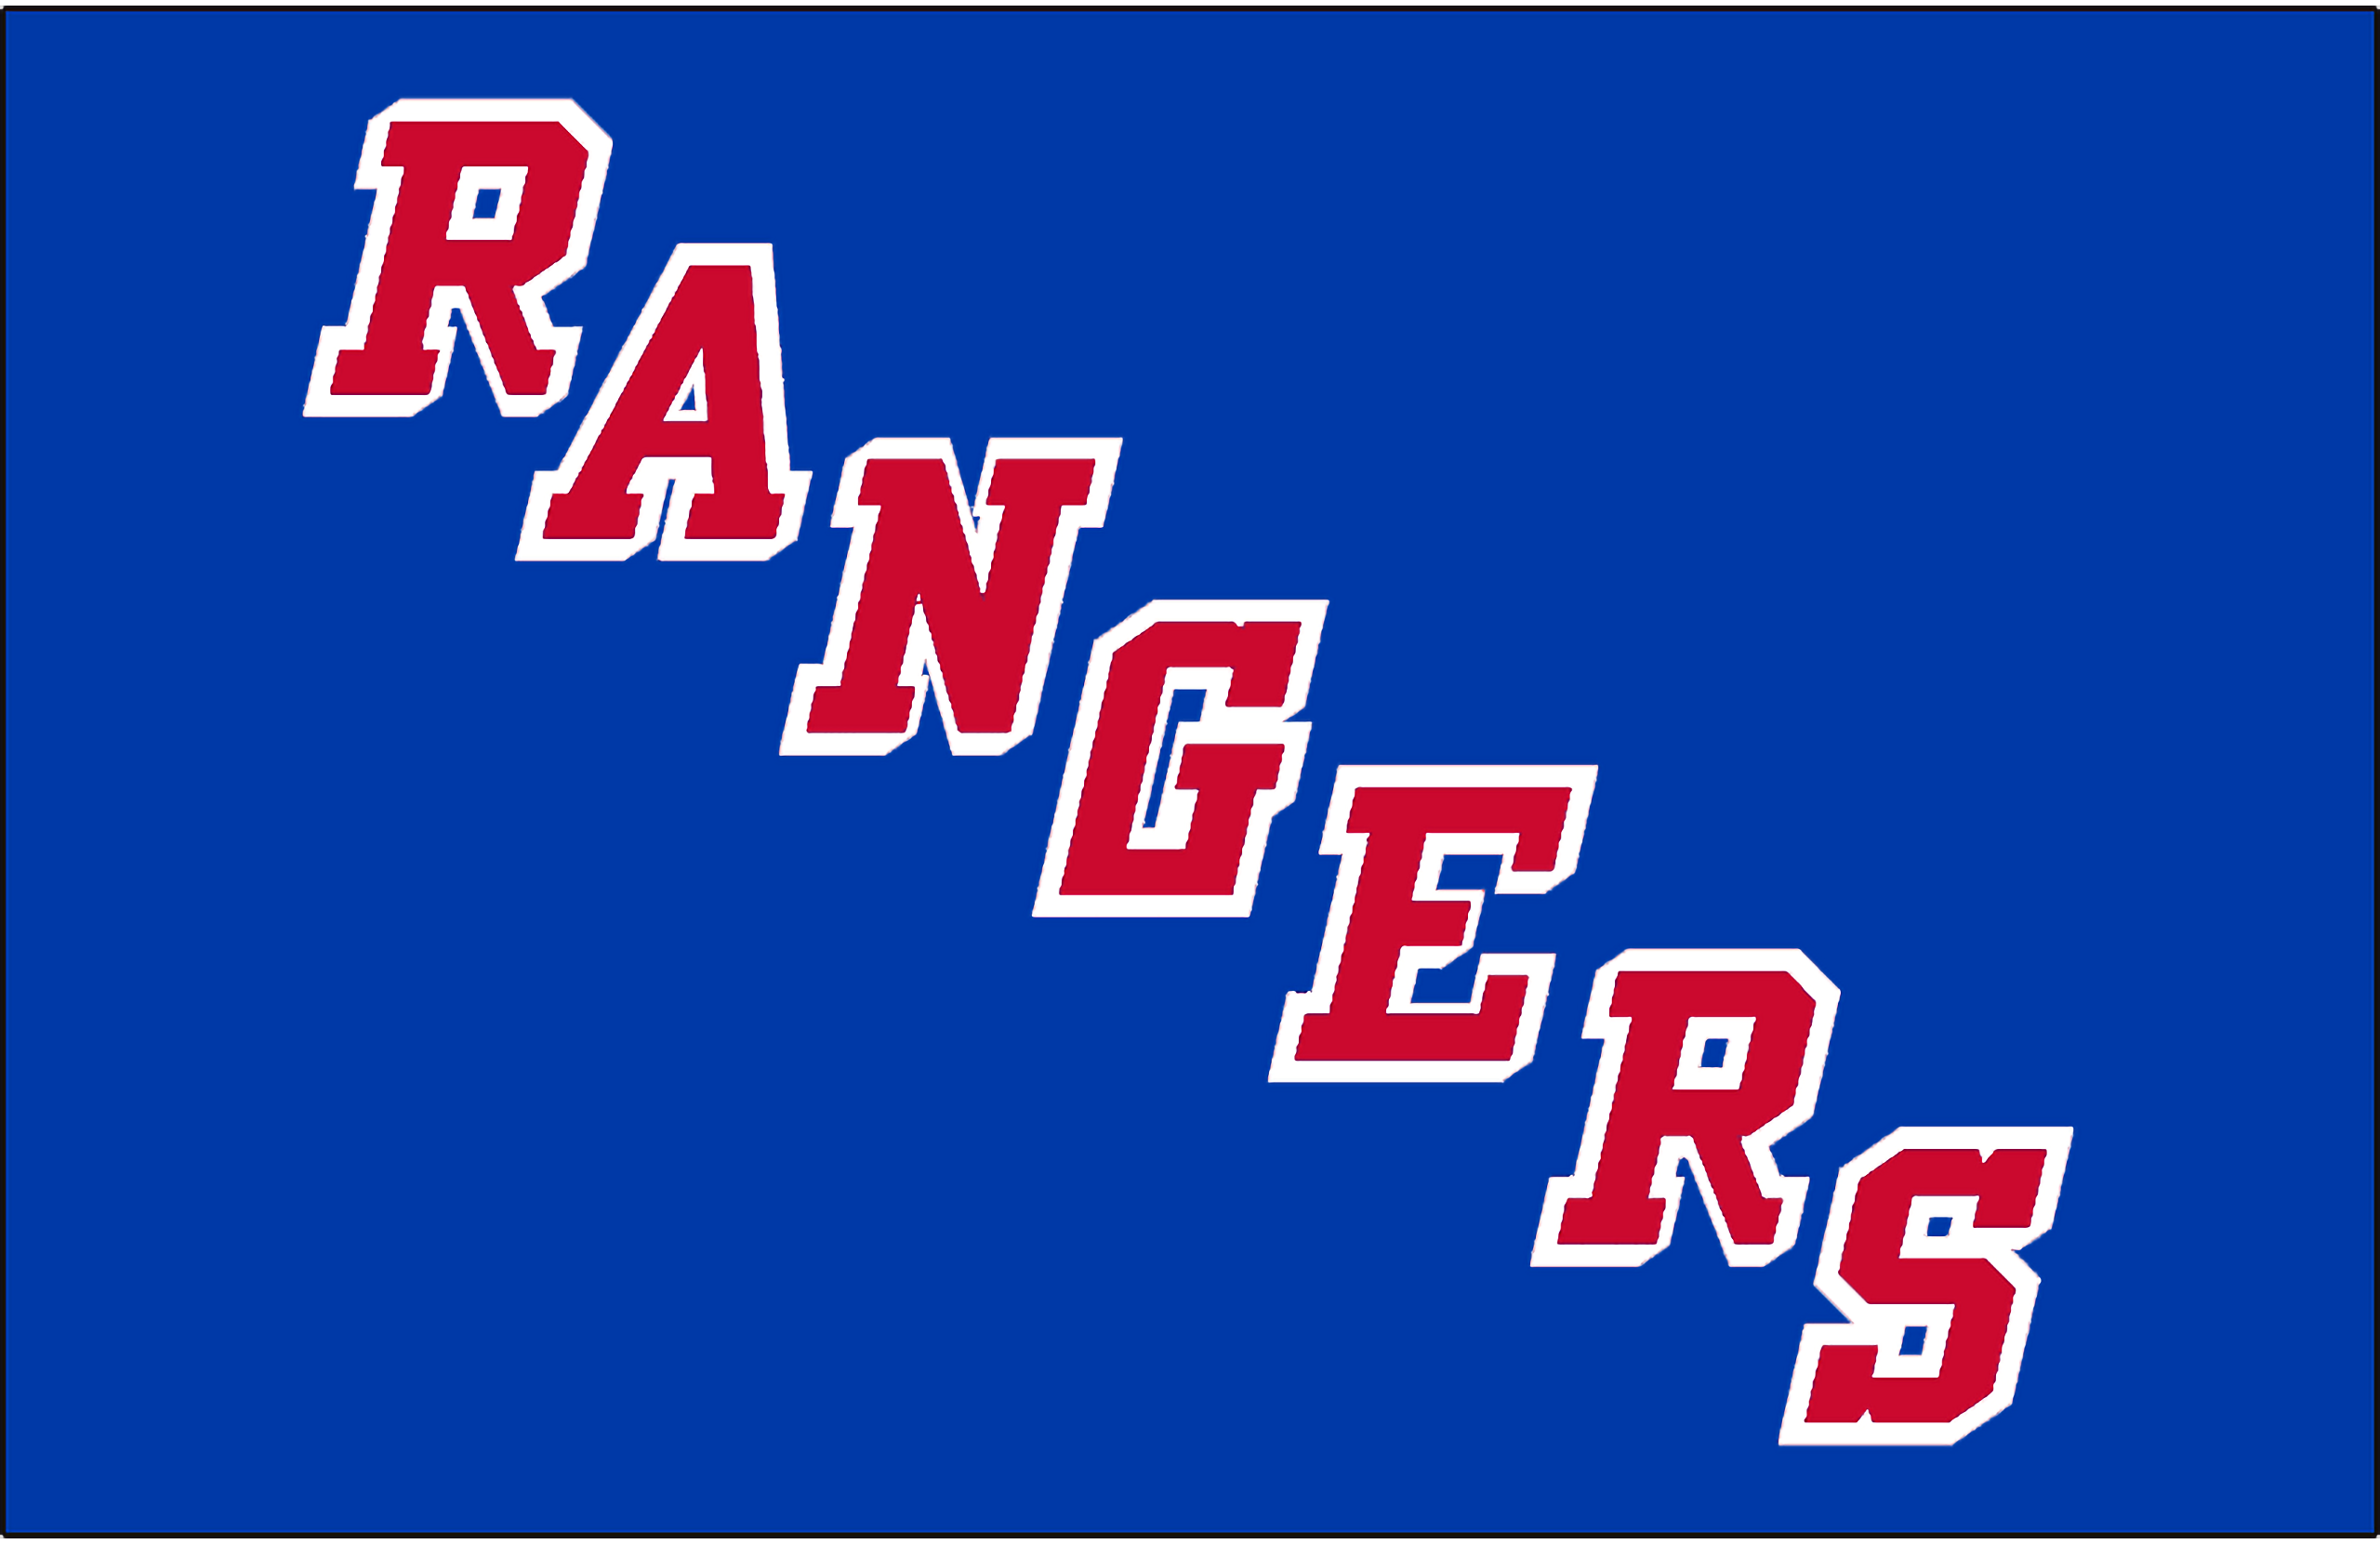 Ny Rangers Wall Paper Wallpapers